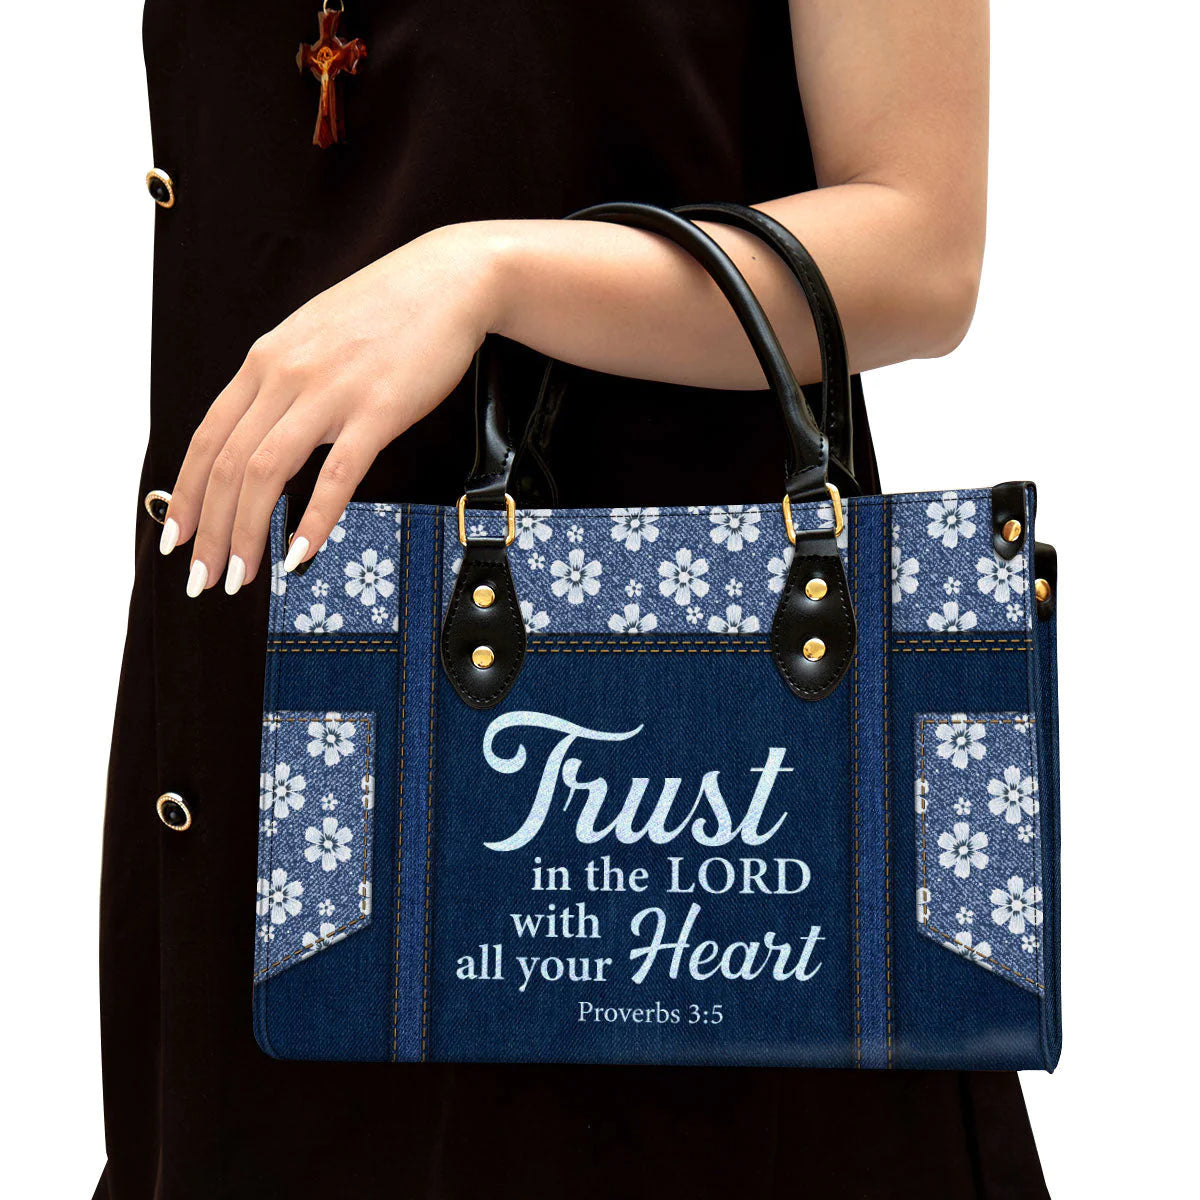 Christianart Handbag, Trust In The Lord With All Your Heart, Personalized Gifts, Gifts for Women. - Christian Art Bag